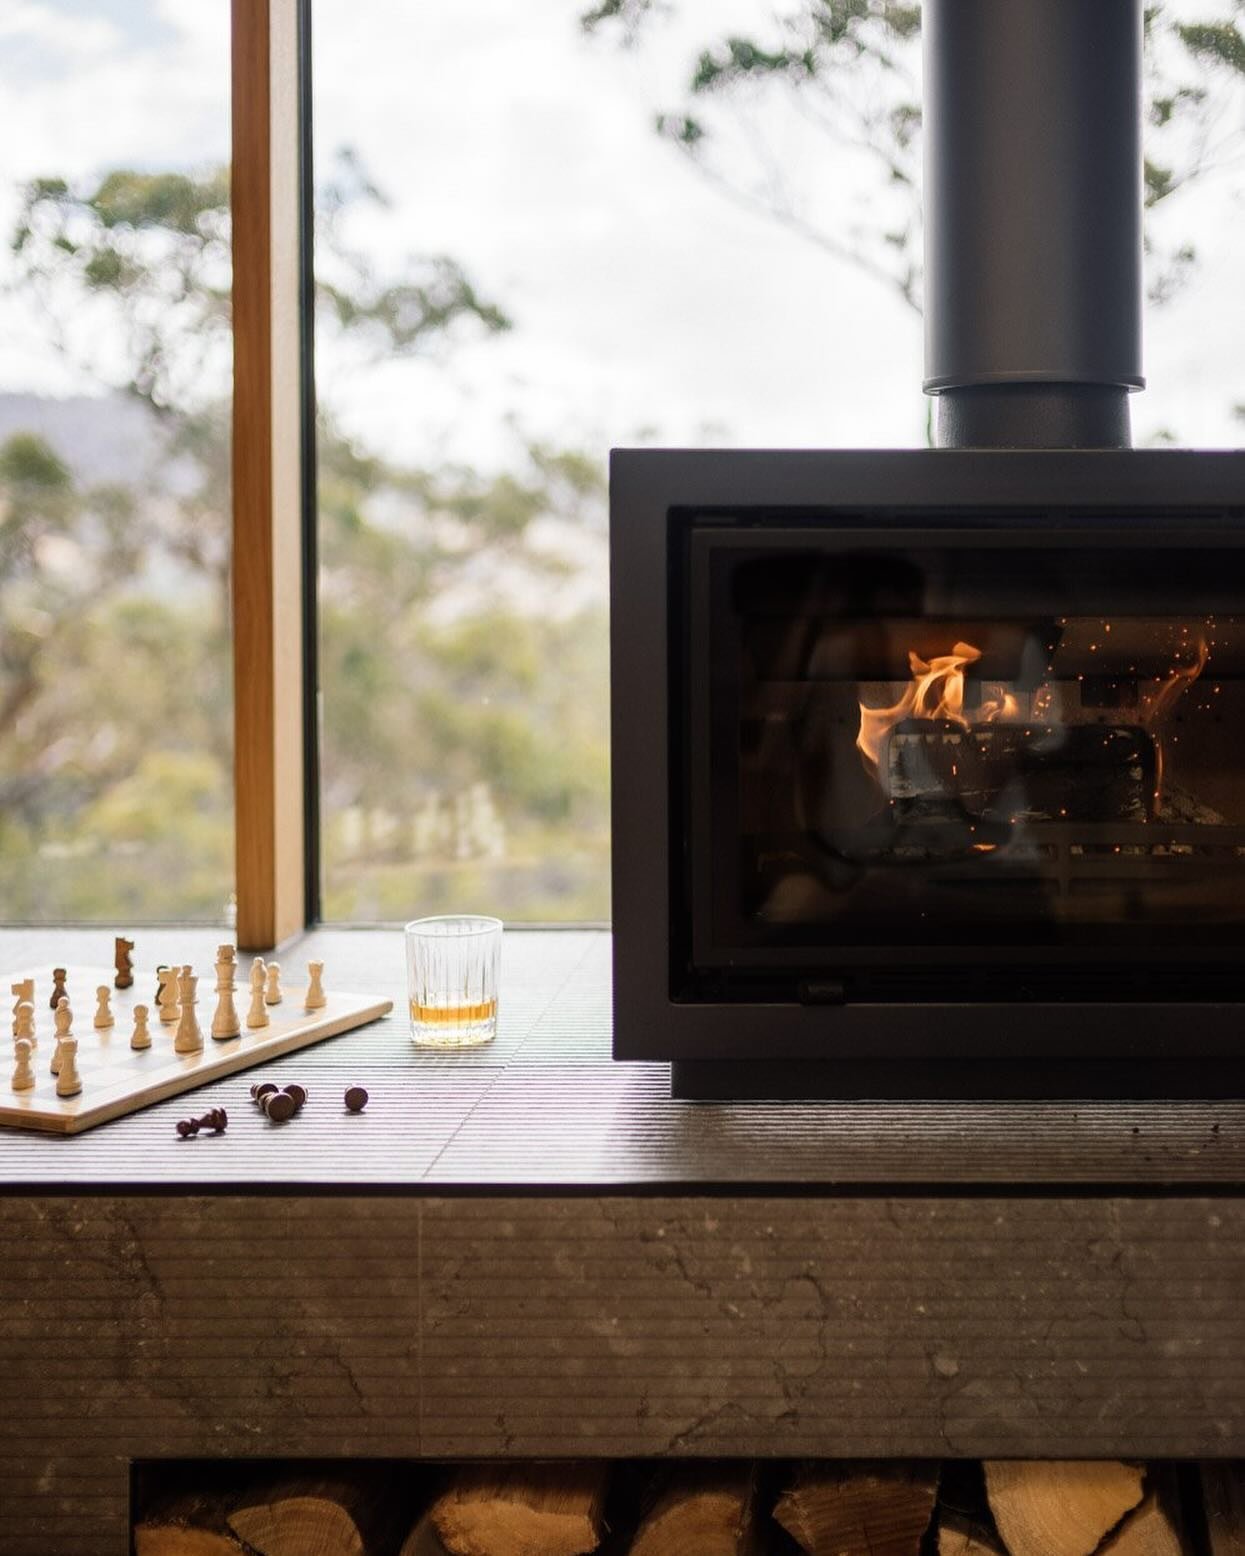 Slow days to reflect and be grateful for the simple things in life 🤎

Image by @leantimms 
Styling by @lynda.gardener 

#hunterhuonvalley #huonvalley #glenhuon #interiordesign #interiors #mindfulness #slow #gratitude #mindfulness #australianphotogra